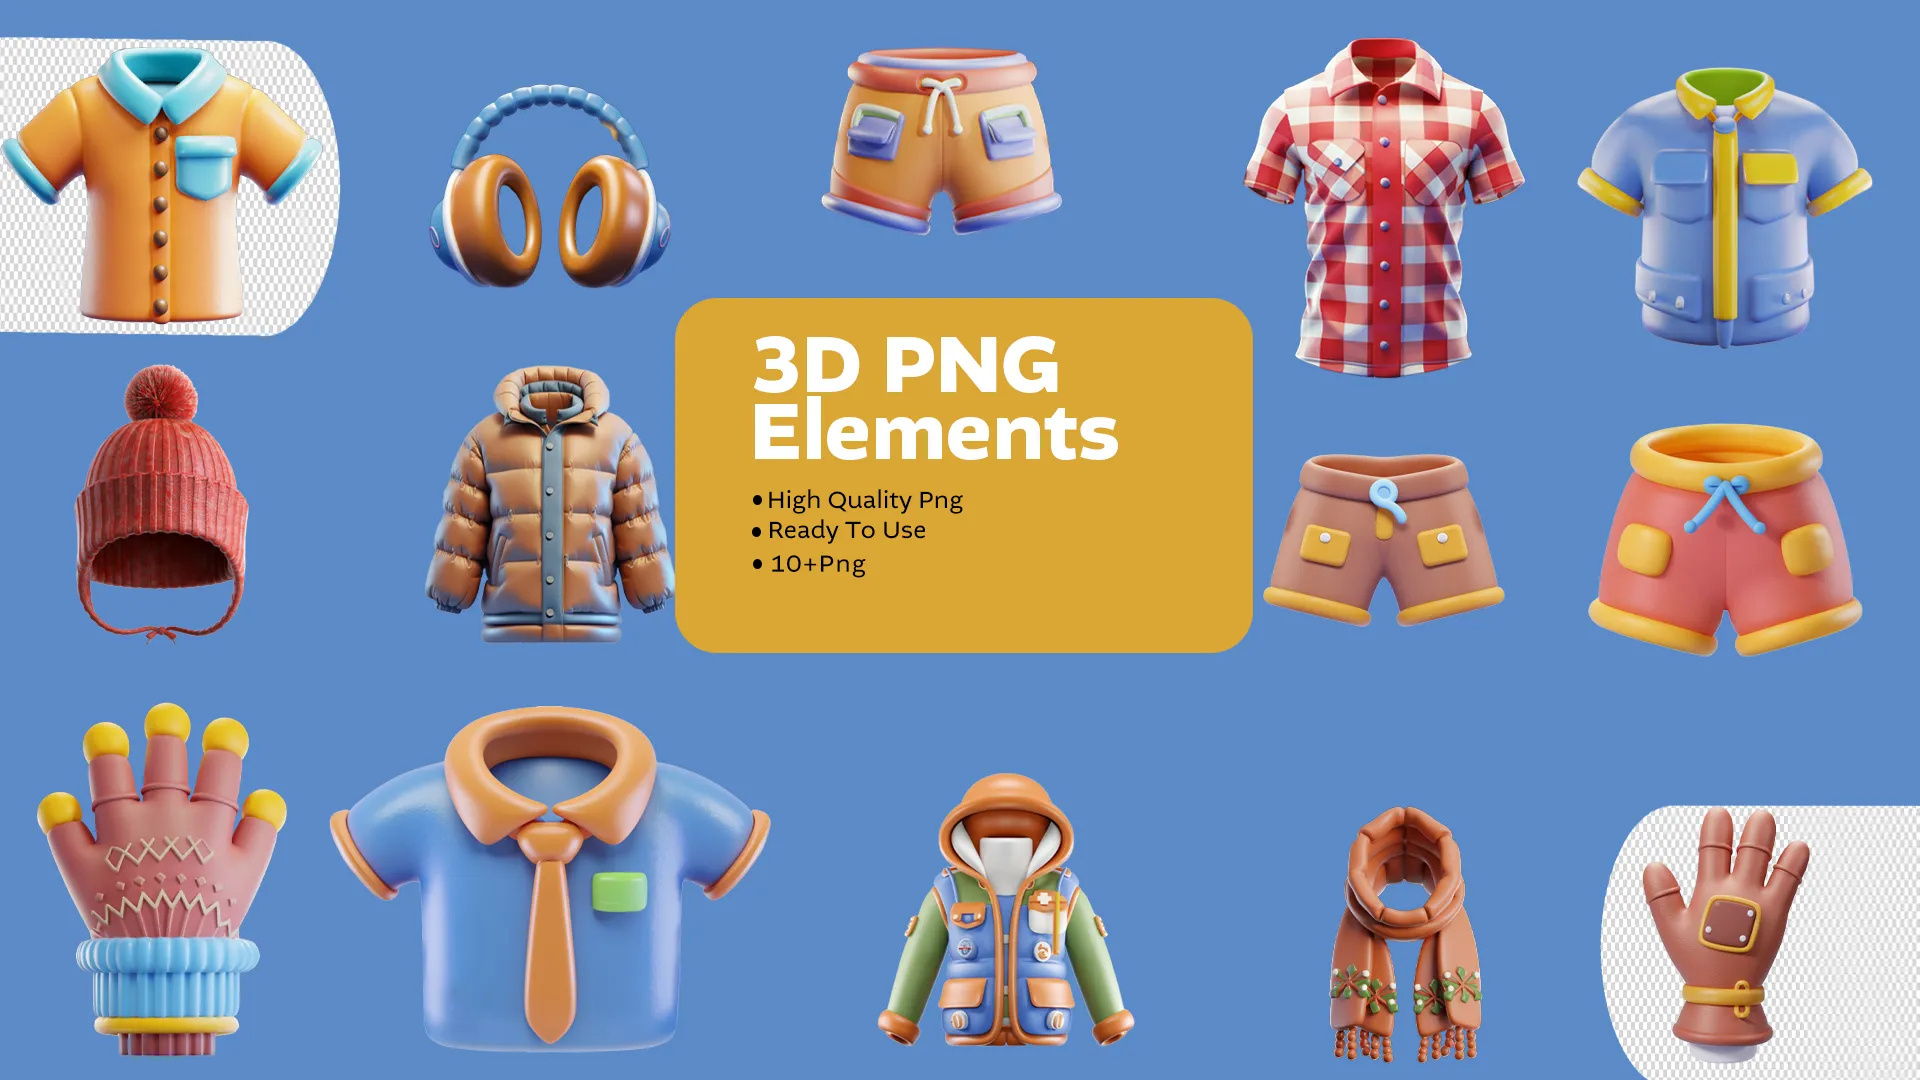 Stylish Winter Apparel 3D Pack for Fashion Design